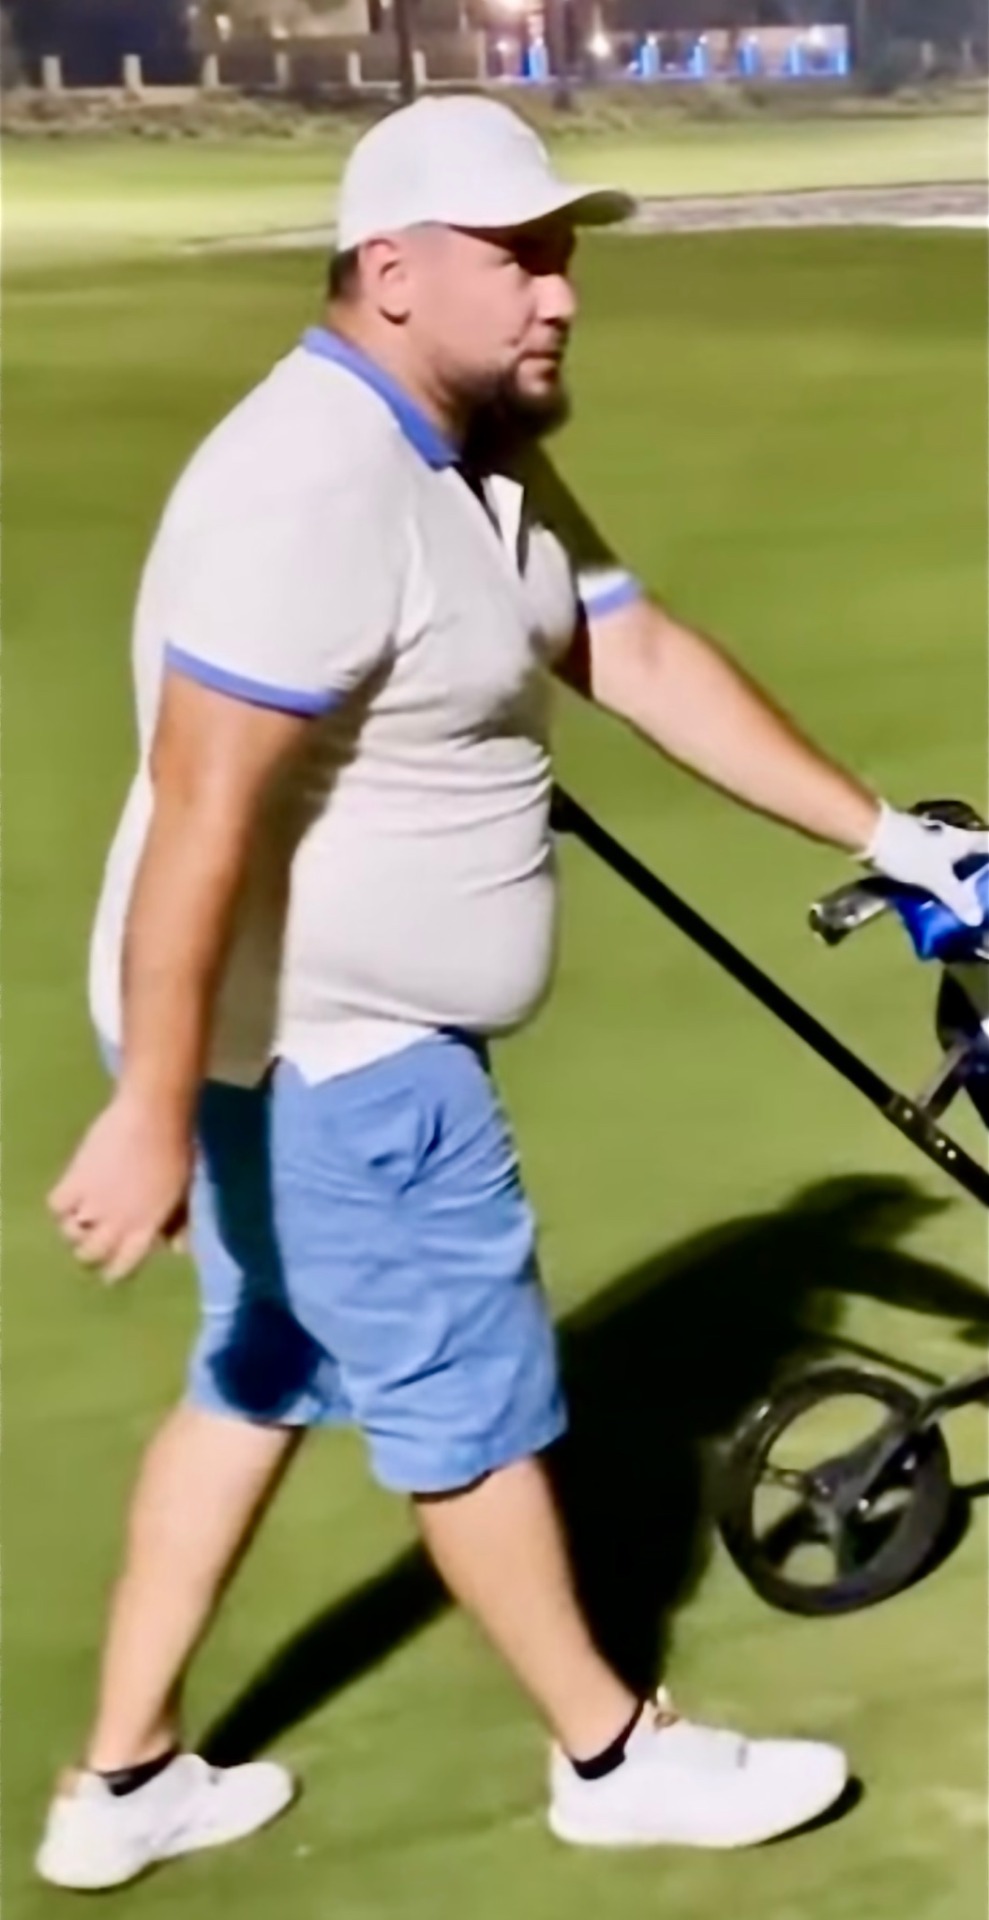 vavavoommmsblog:fatass on the golf course… i think ur gonna need a bigger shirt 😭 